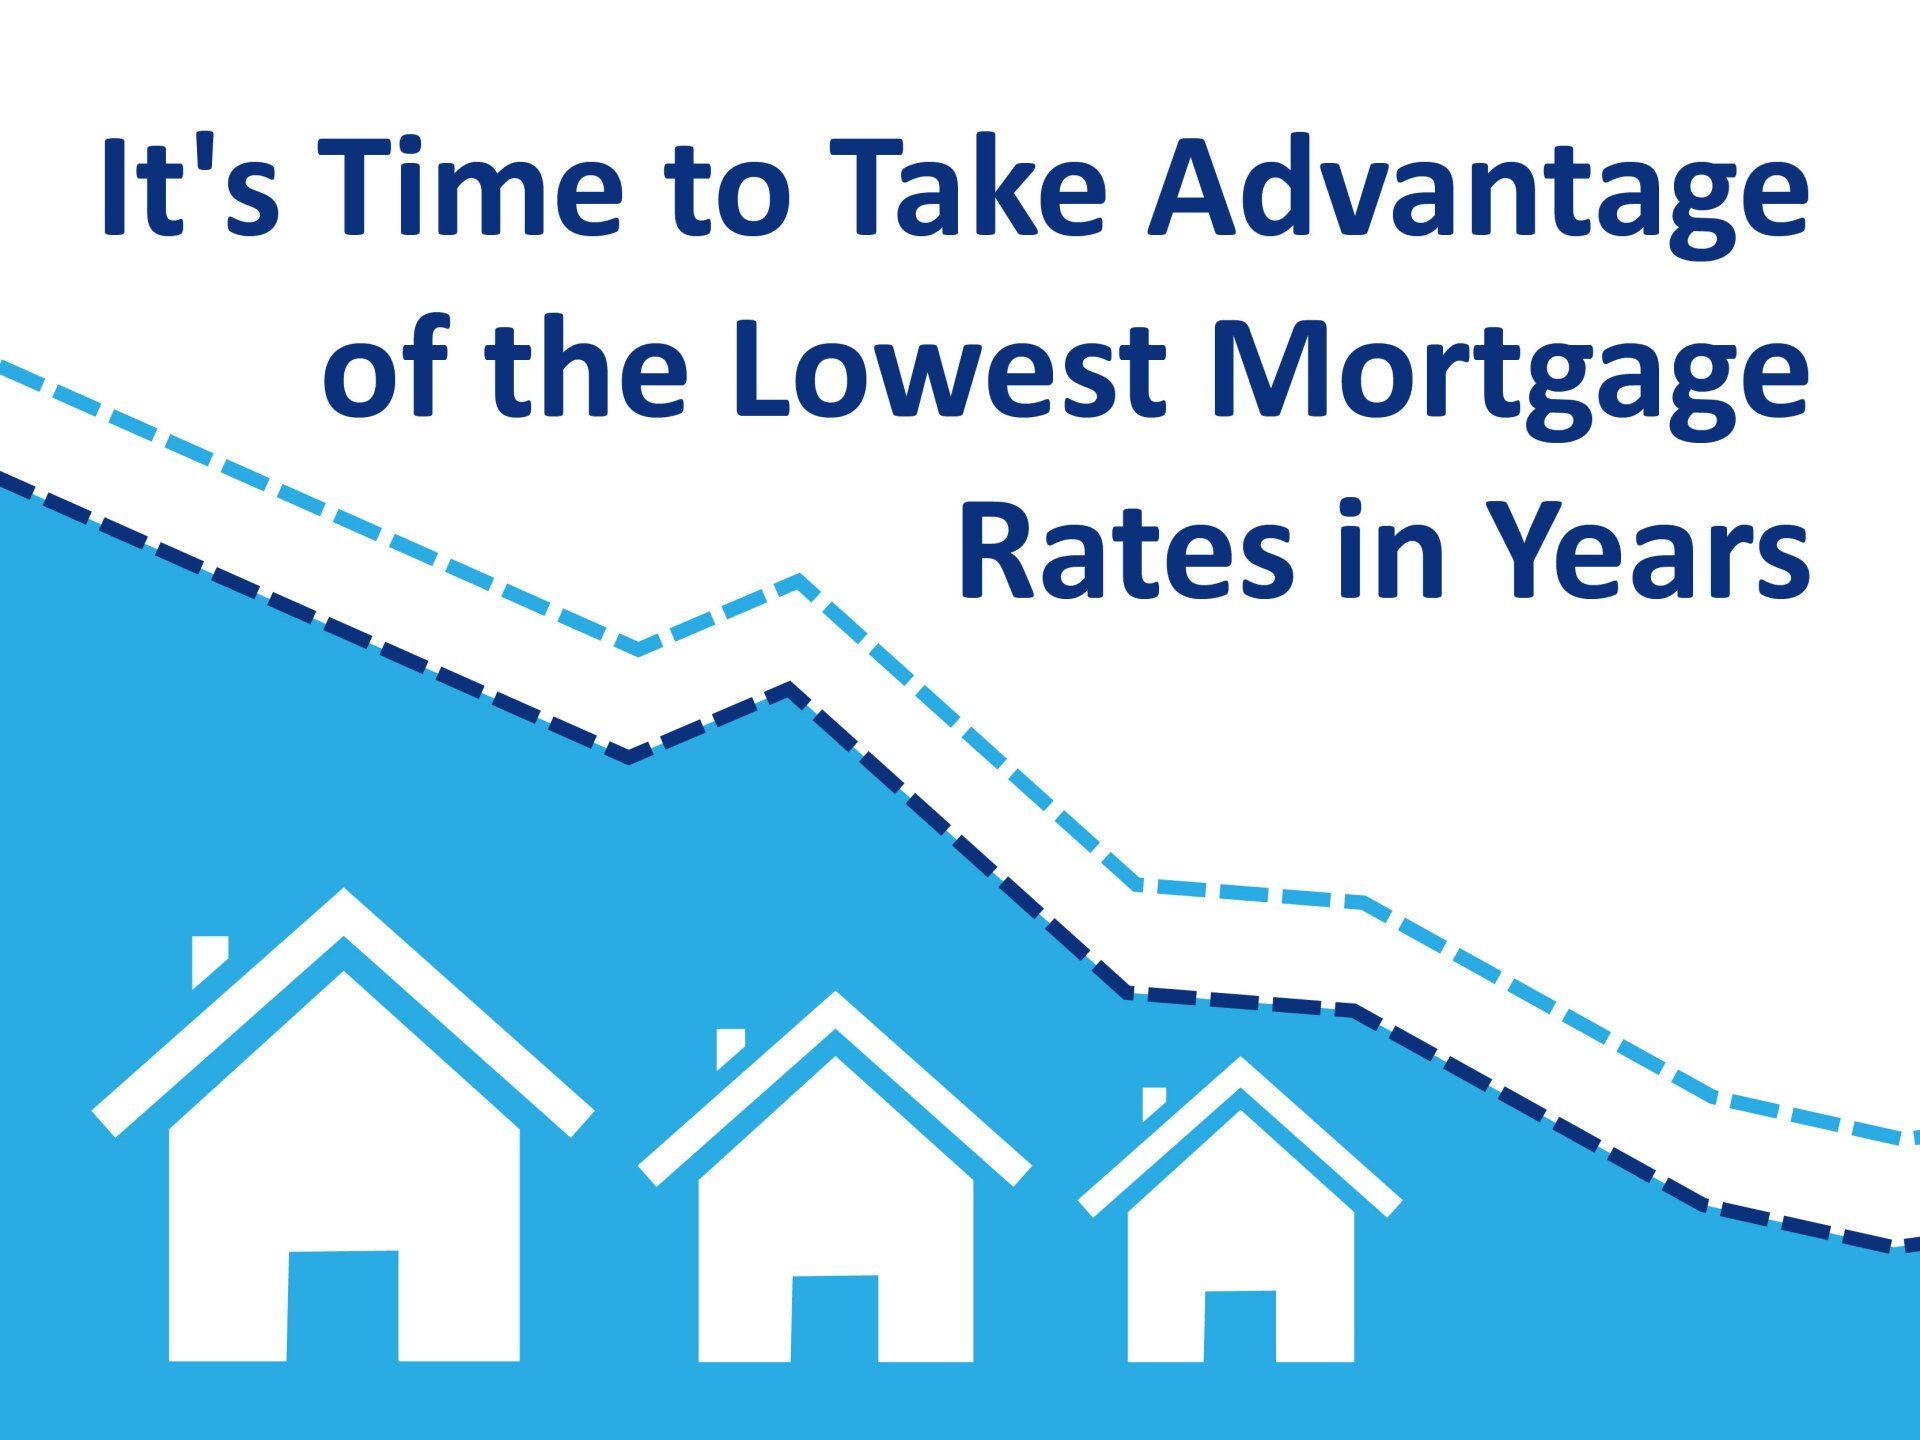 Take Advantage of the Lowest Mortgage Rates